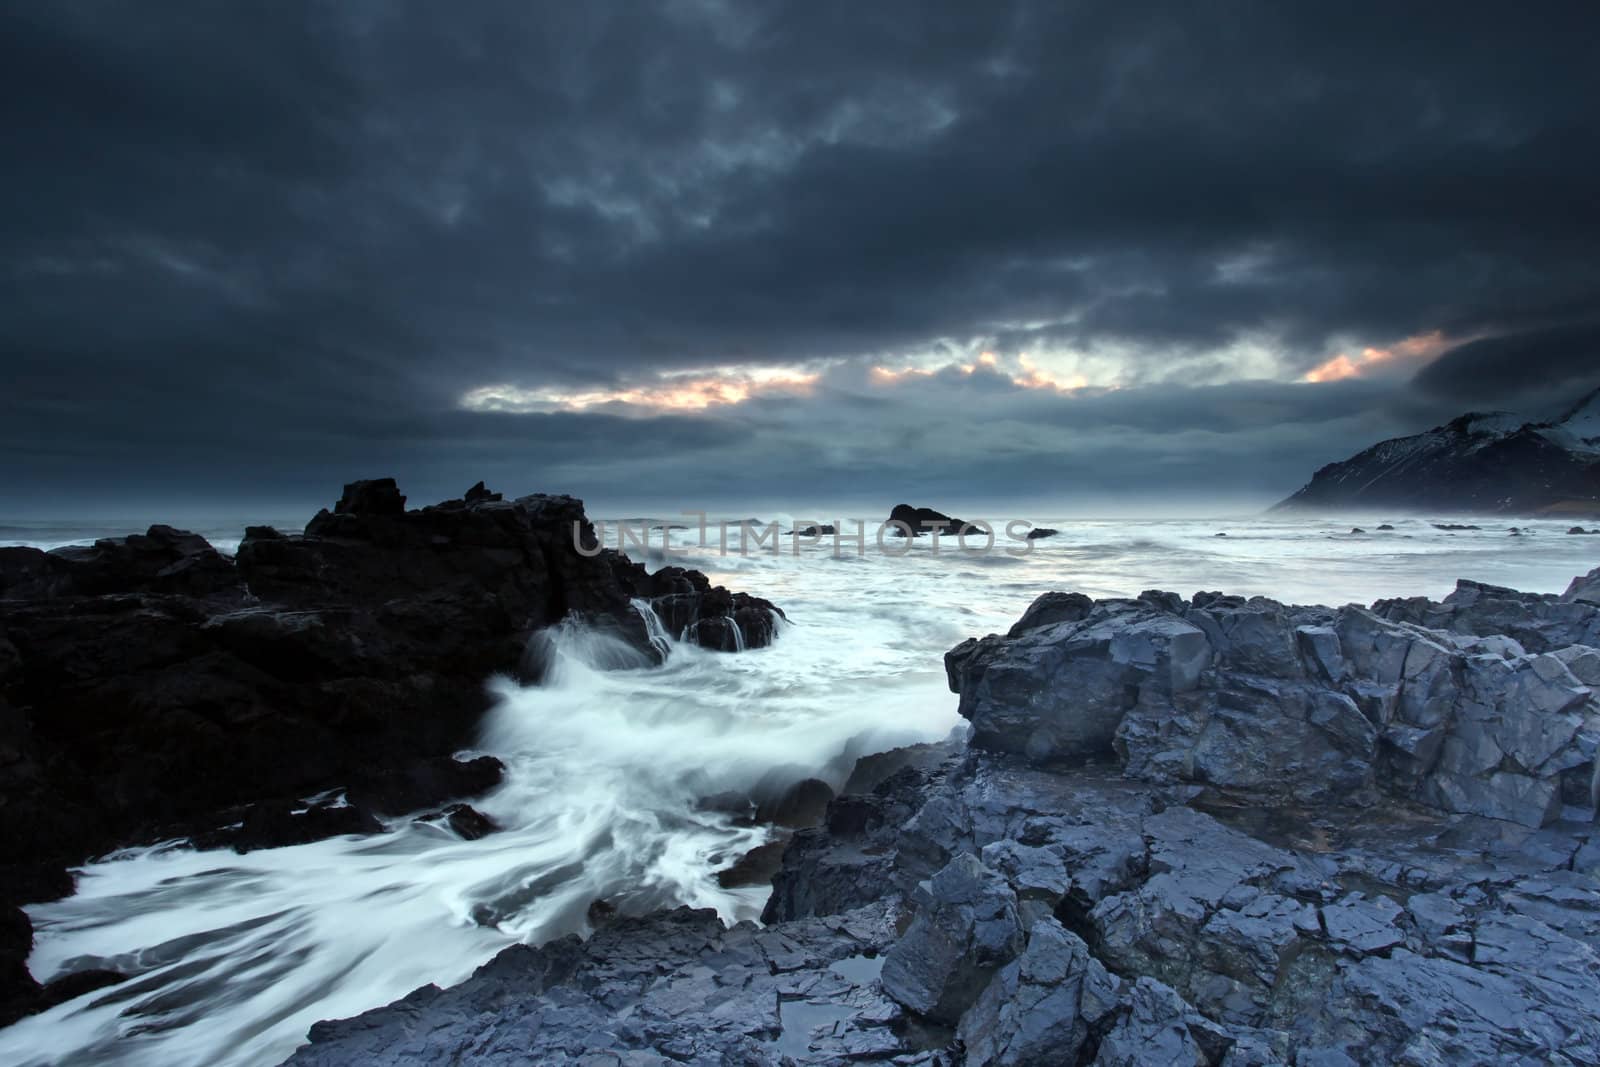 Stormy sea in south east iceland by olliemt